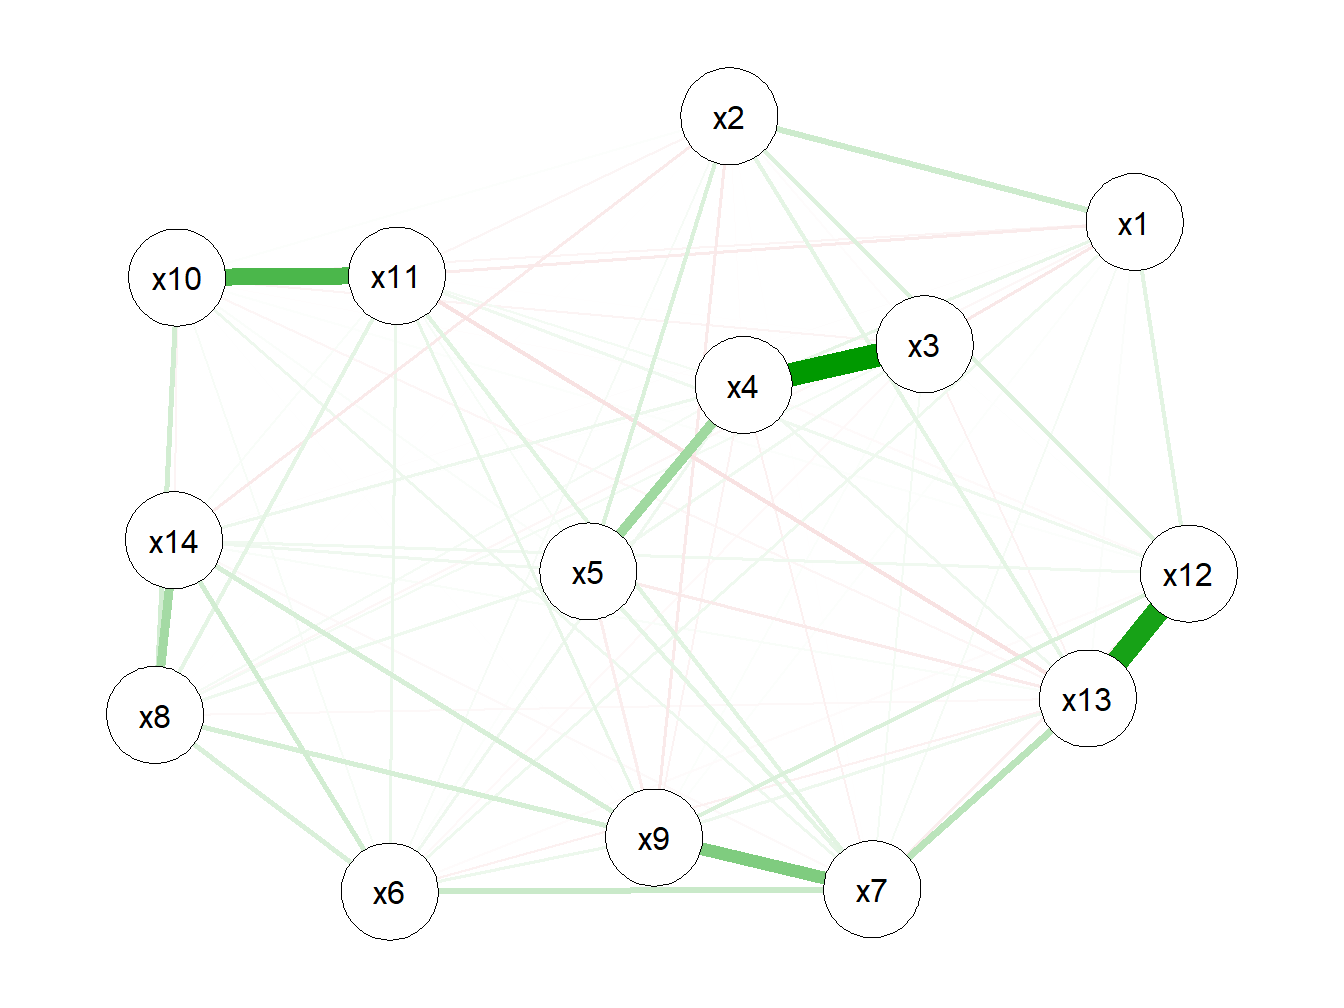 Weighted correlation network of exposures in the simulated data